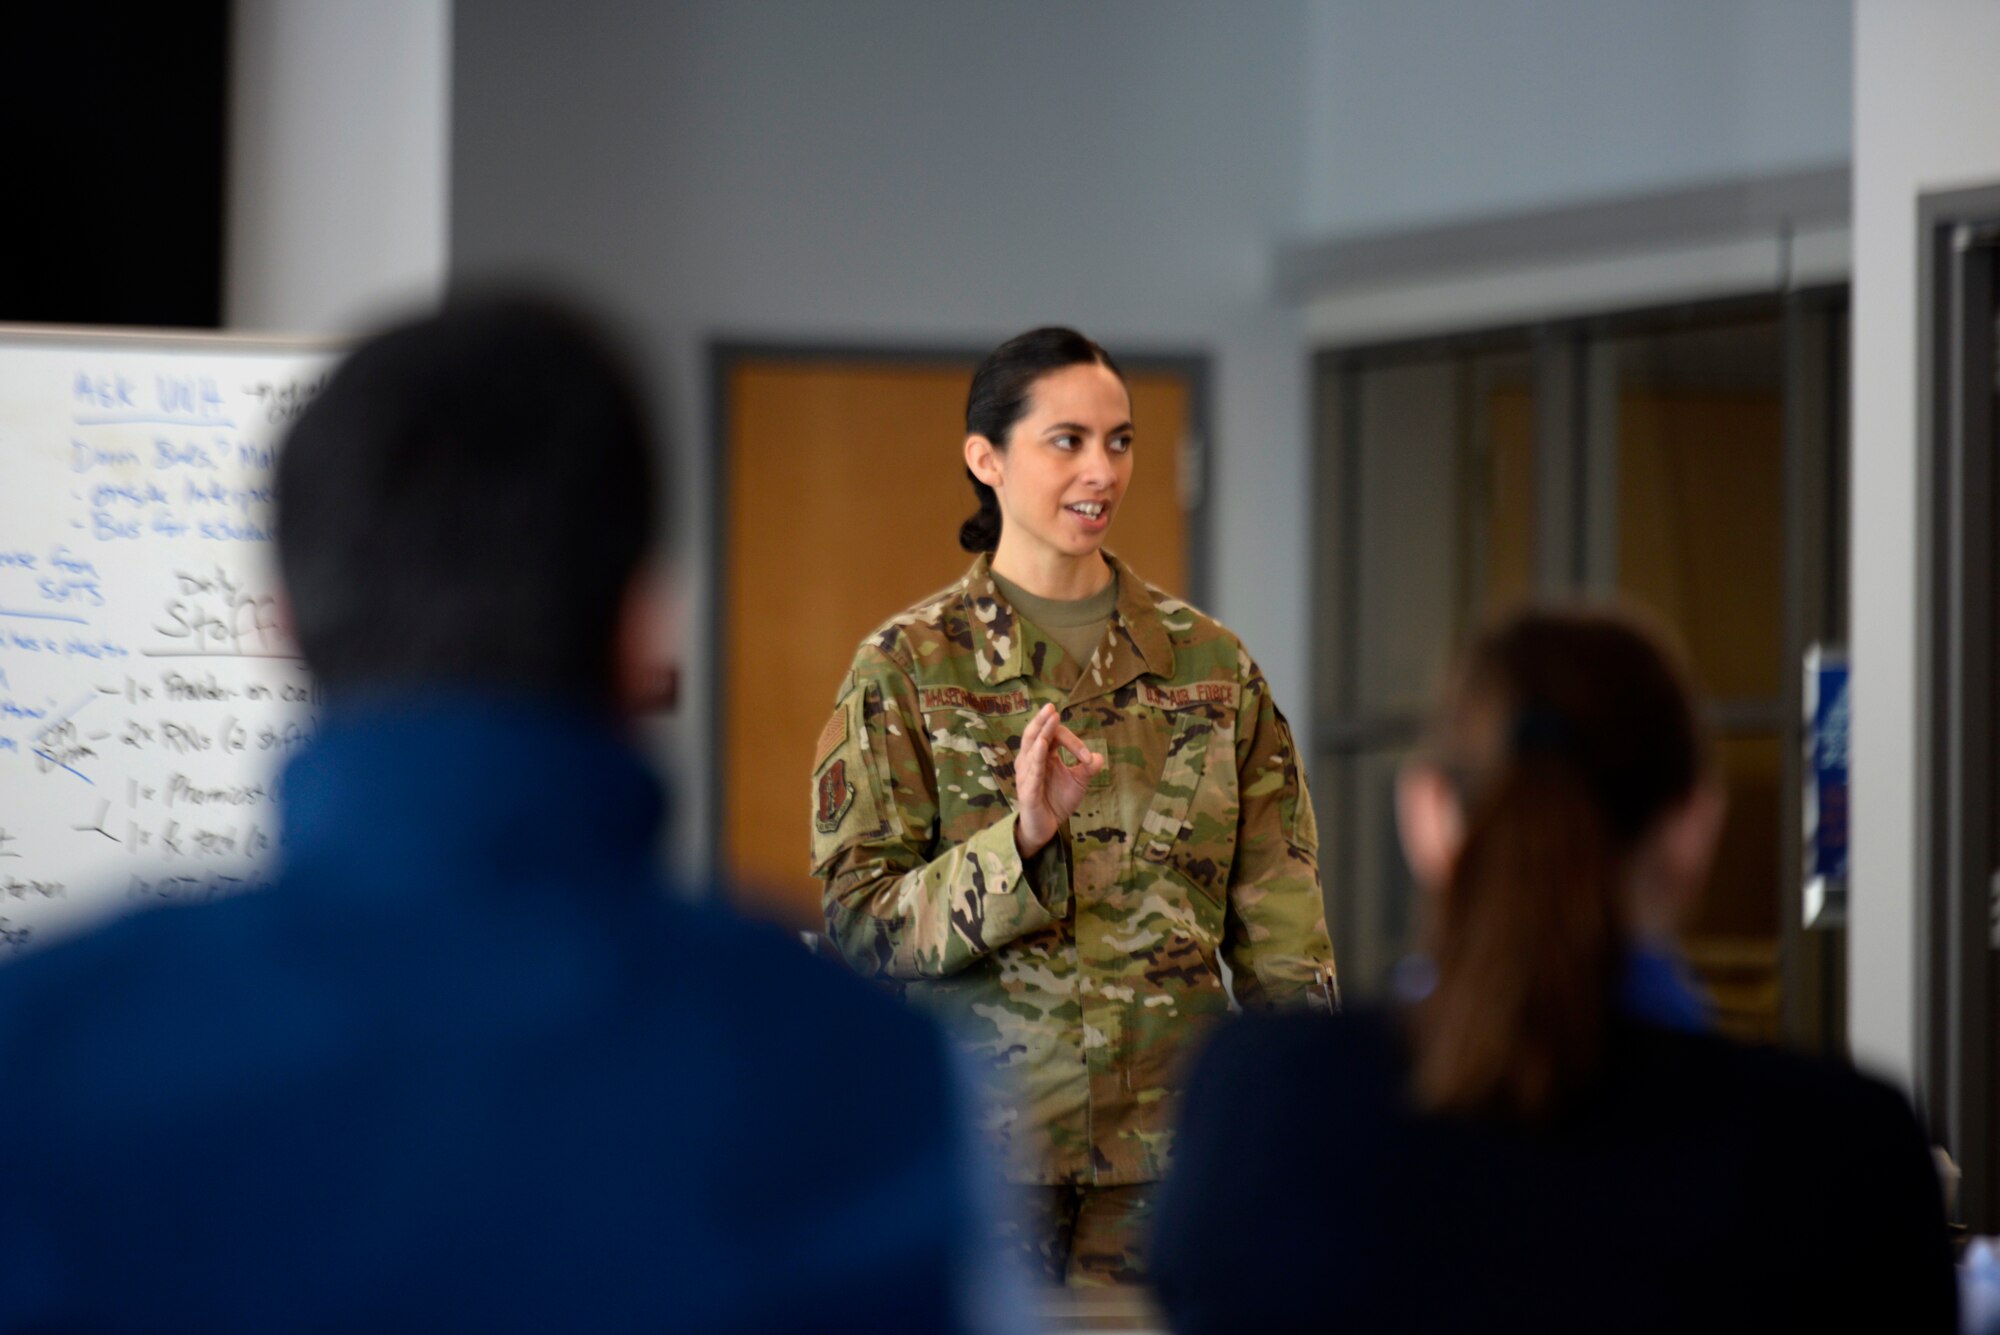 Maj. Michelle Mastrobattista, administration officer for the 157th Medical Group, New Hampshire Air National Guard, discusses with regional hospital representatives the operations scope of the additional care site at the Hamel Recreation Center, University of New Hampshire on March 26. The facility in Durham will augment area hospitals treating COVID-19 cases, if necessary. It is one of nine "surge" locations the NH Guard, in coordination with local and state healthcare agencies, plans to set up and manage across the state. (U.S. Air National Guard photo by Tech. Sgt. Aaron Vezeau)